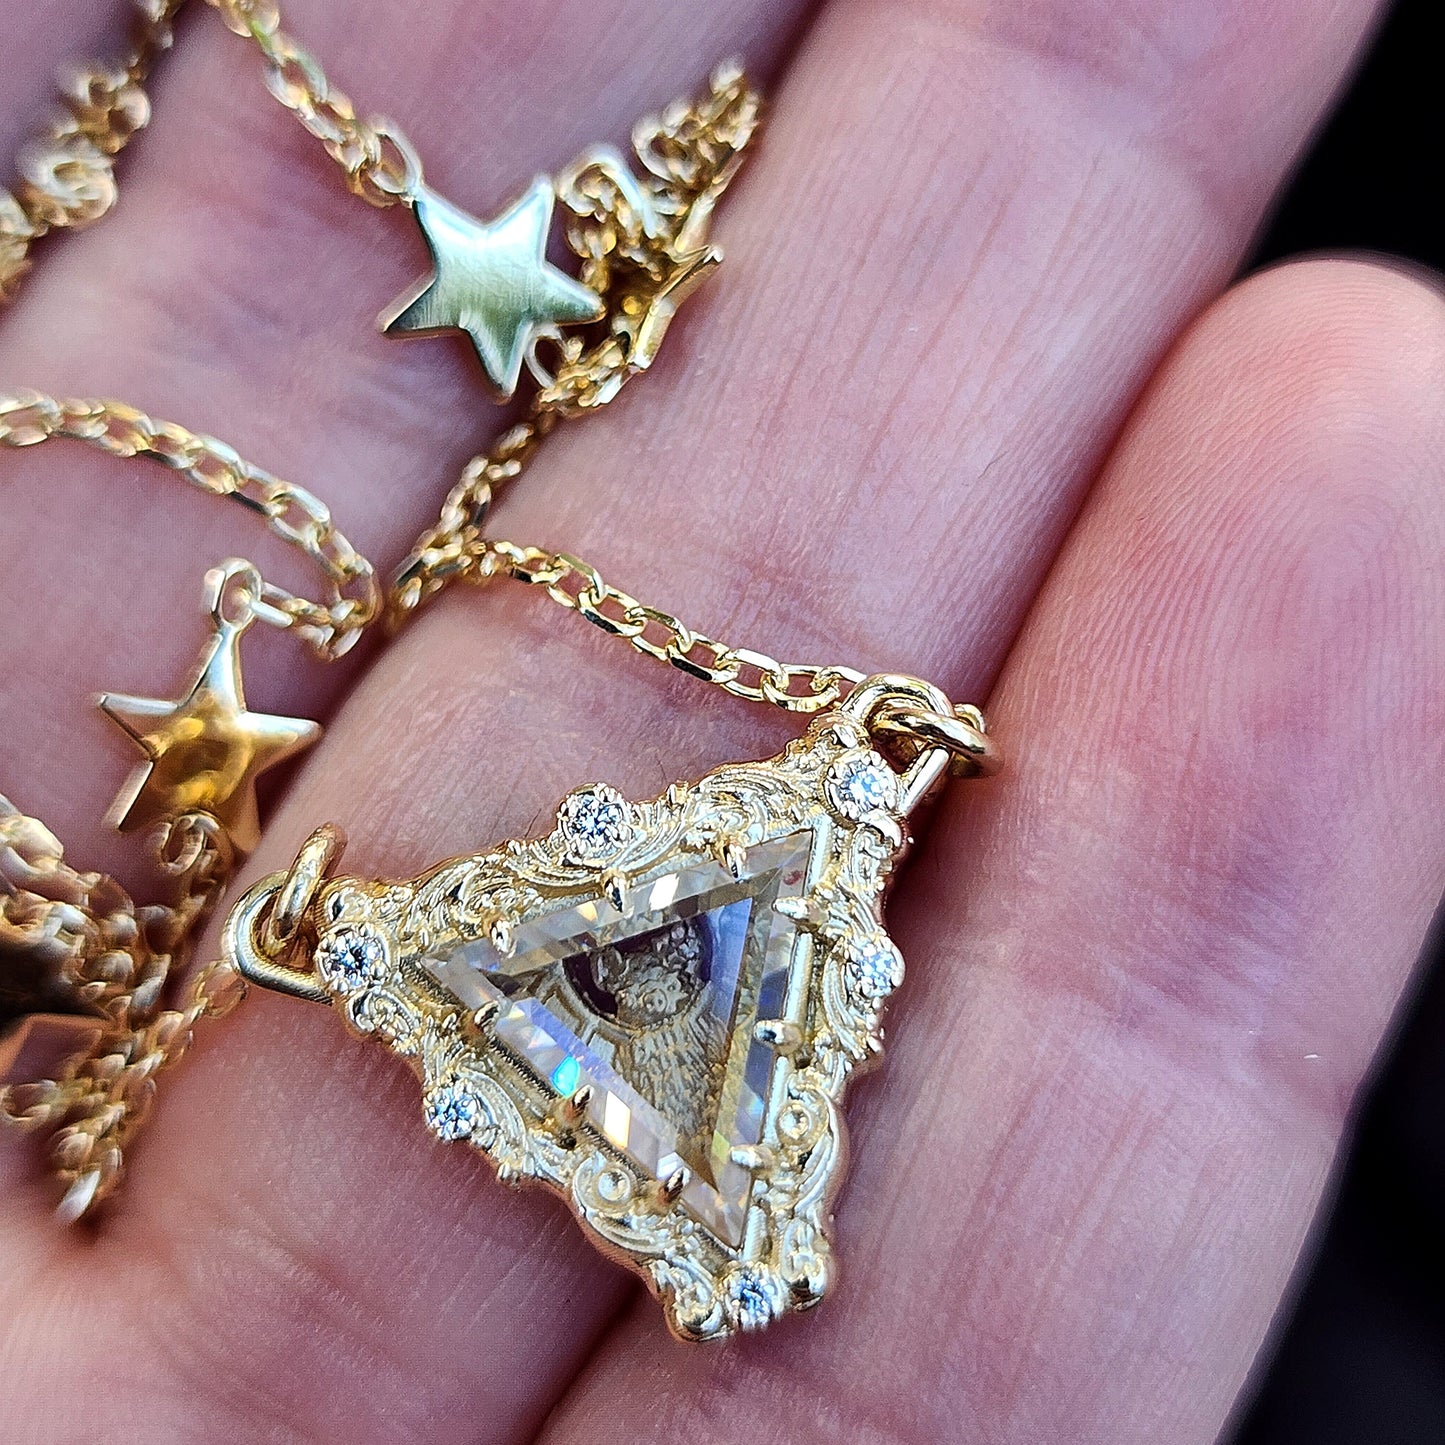 Vampire Bat Pendant with Triangle Moissanite Window Pane and Baroque Gold Frame on Star Chain 14k Yellow Gold - Ready to Ship